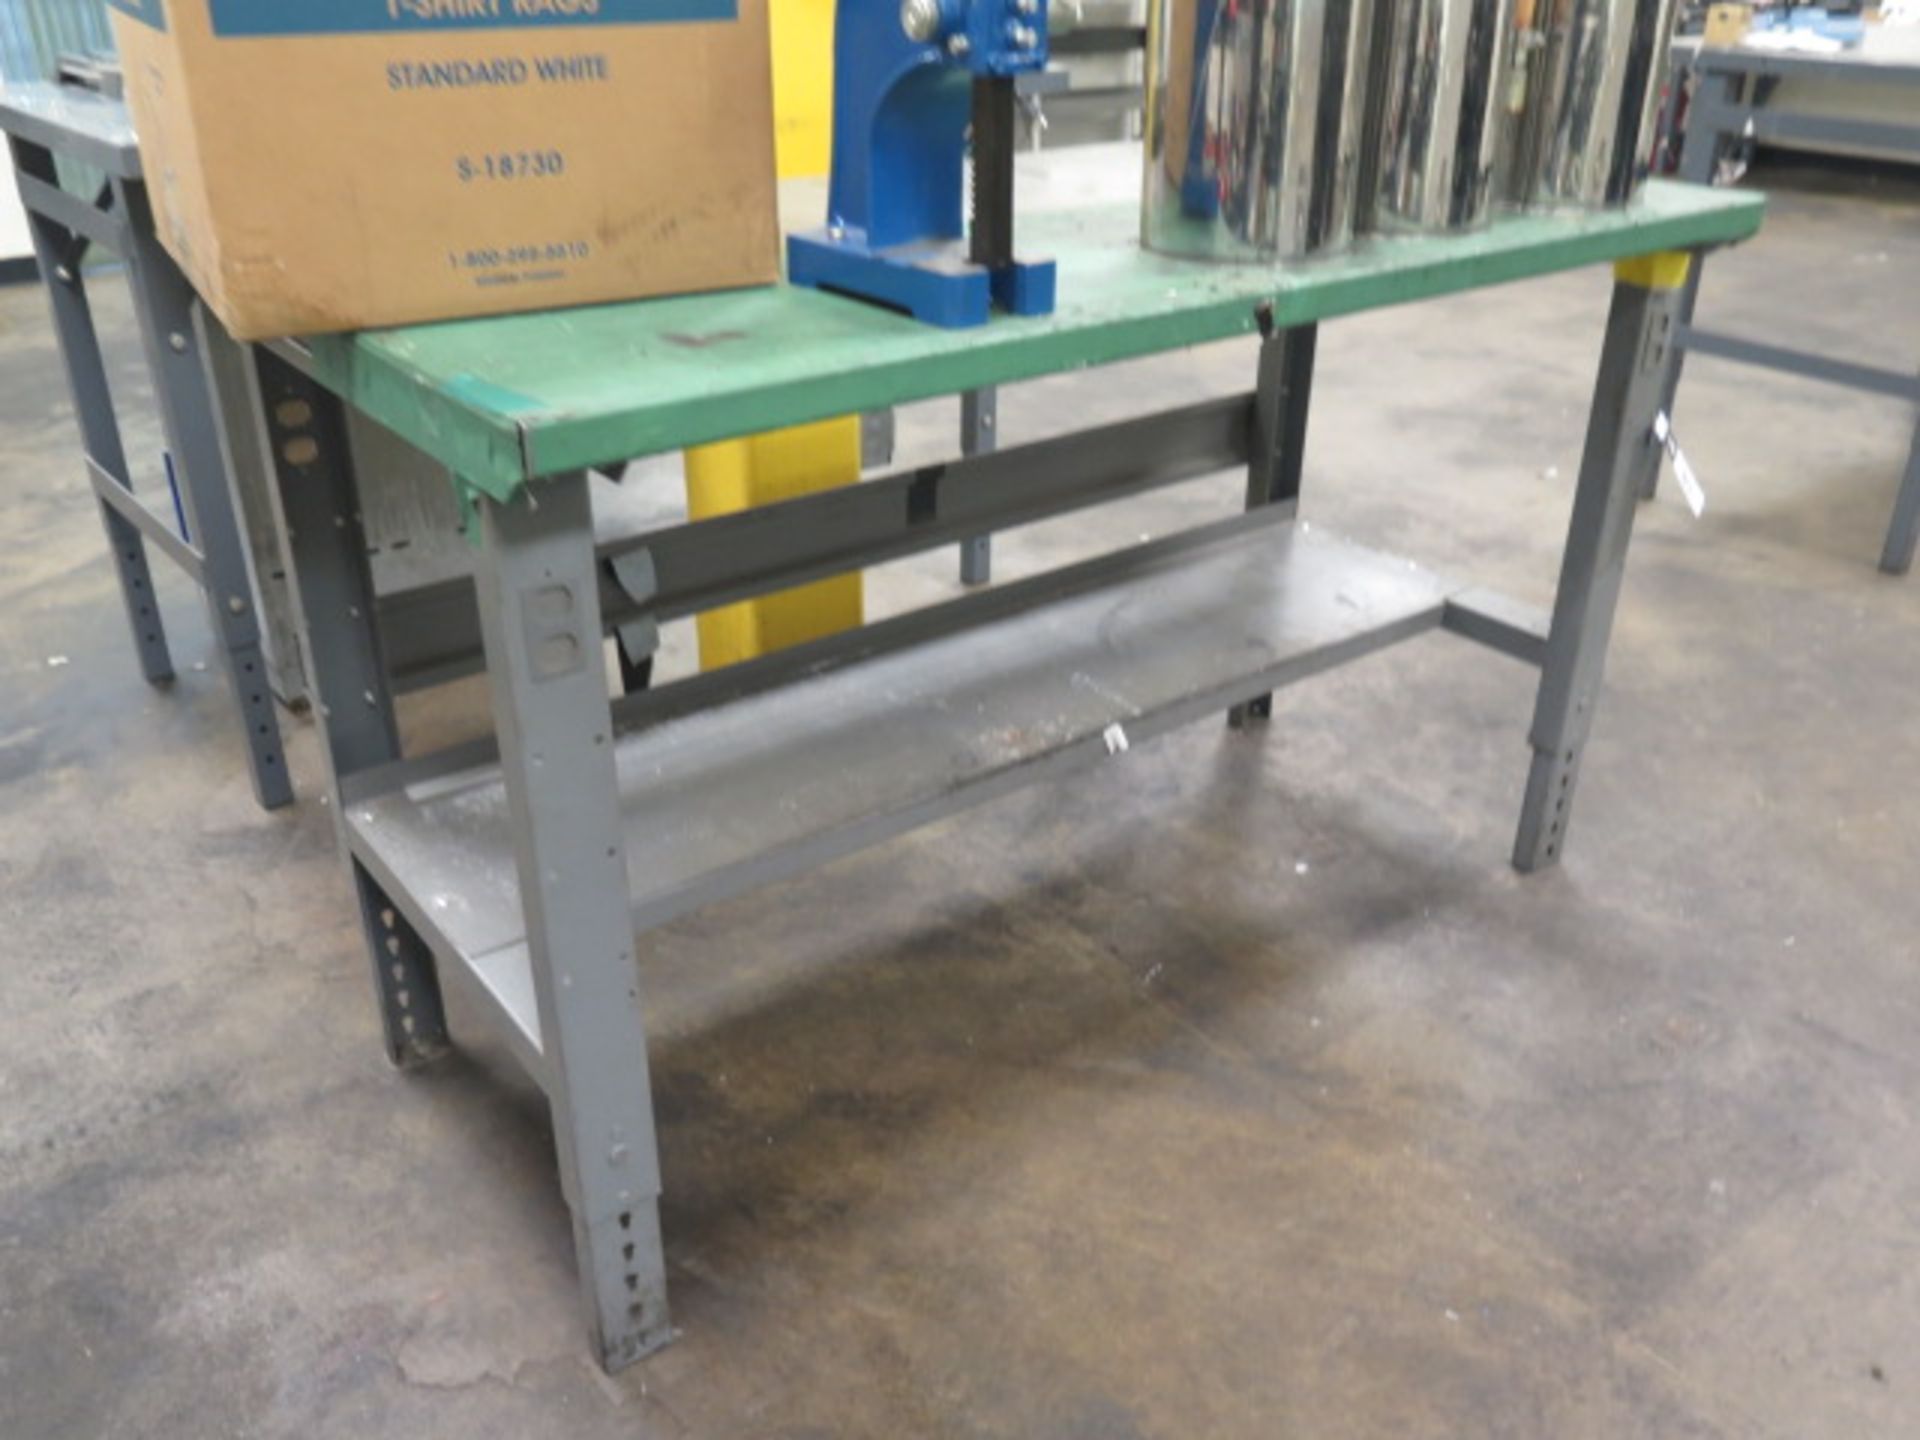 Uline Steel Work bench w/ Bench Vise and Arbor Press (SOLD AS-IS - NO WARRANTY) - Image 6 of 6